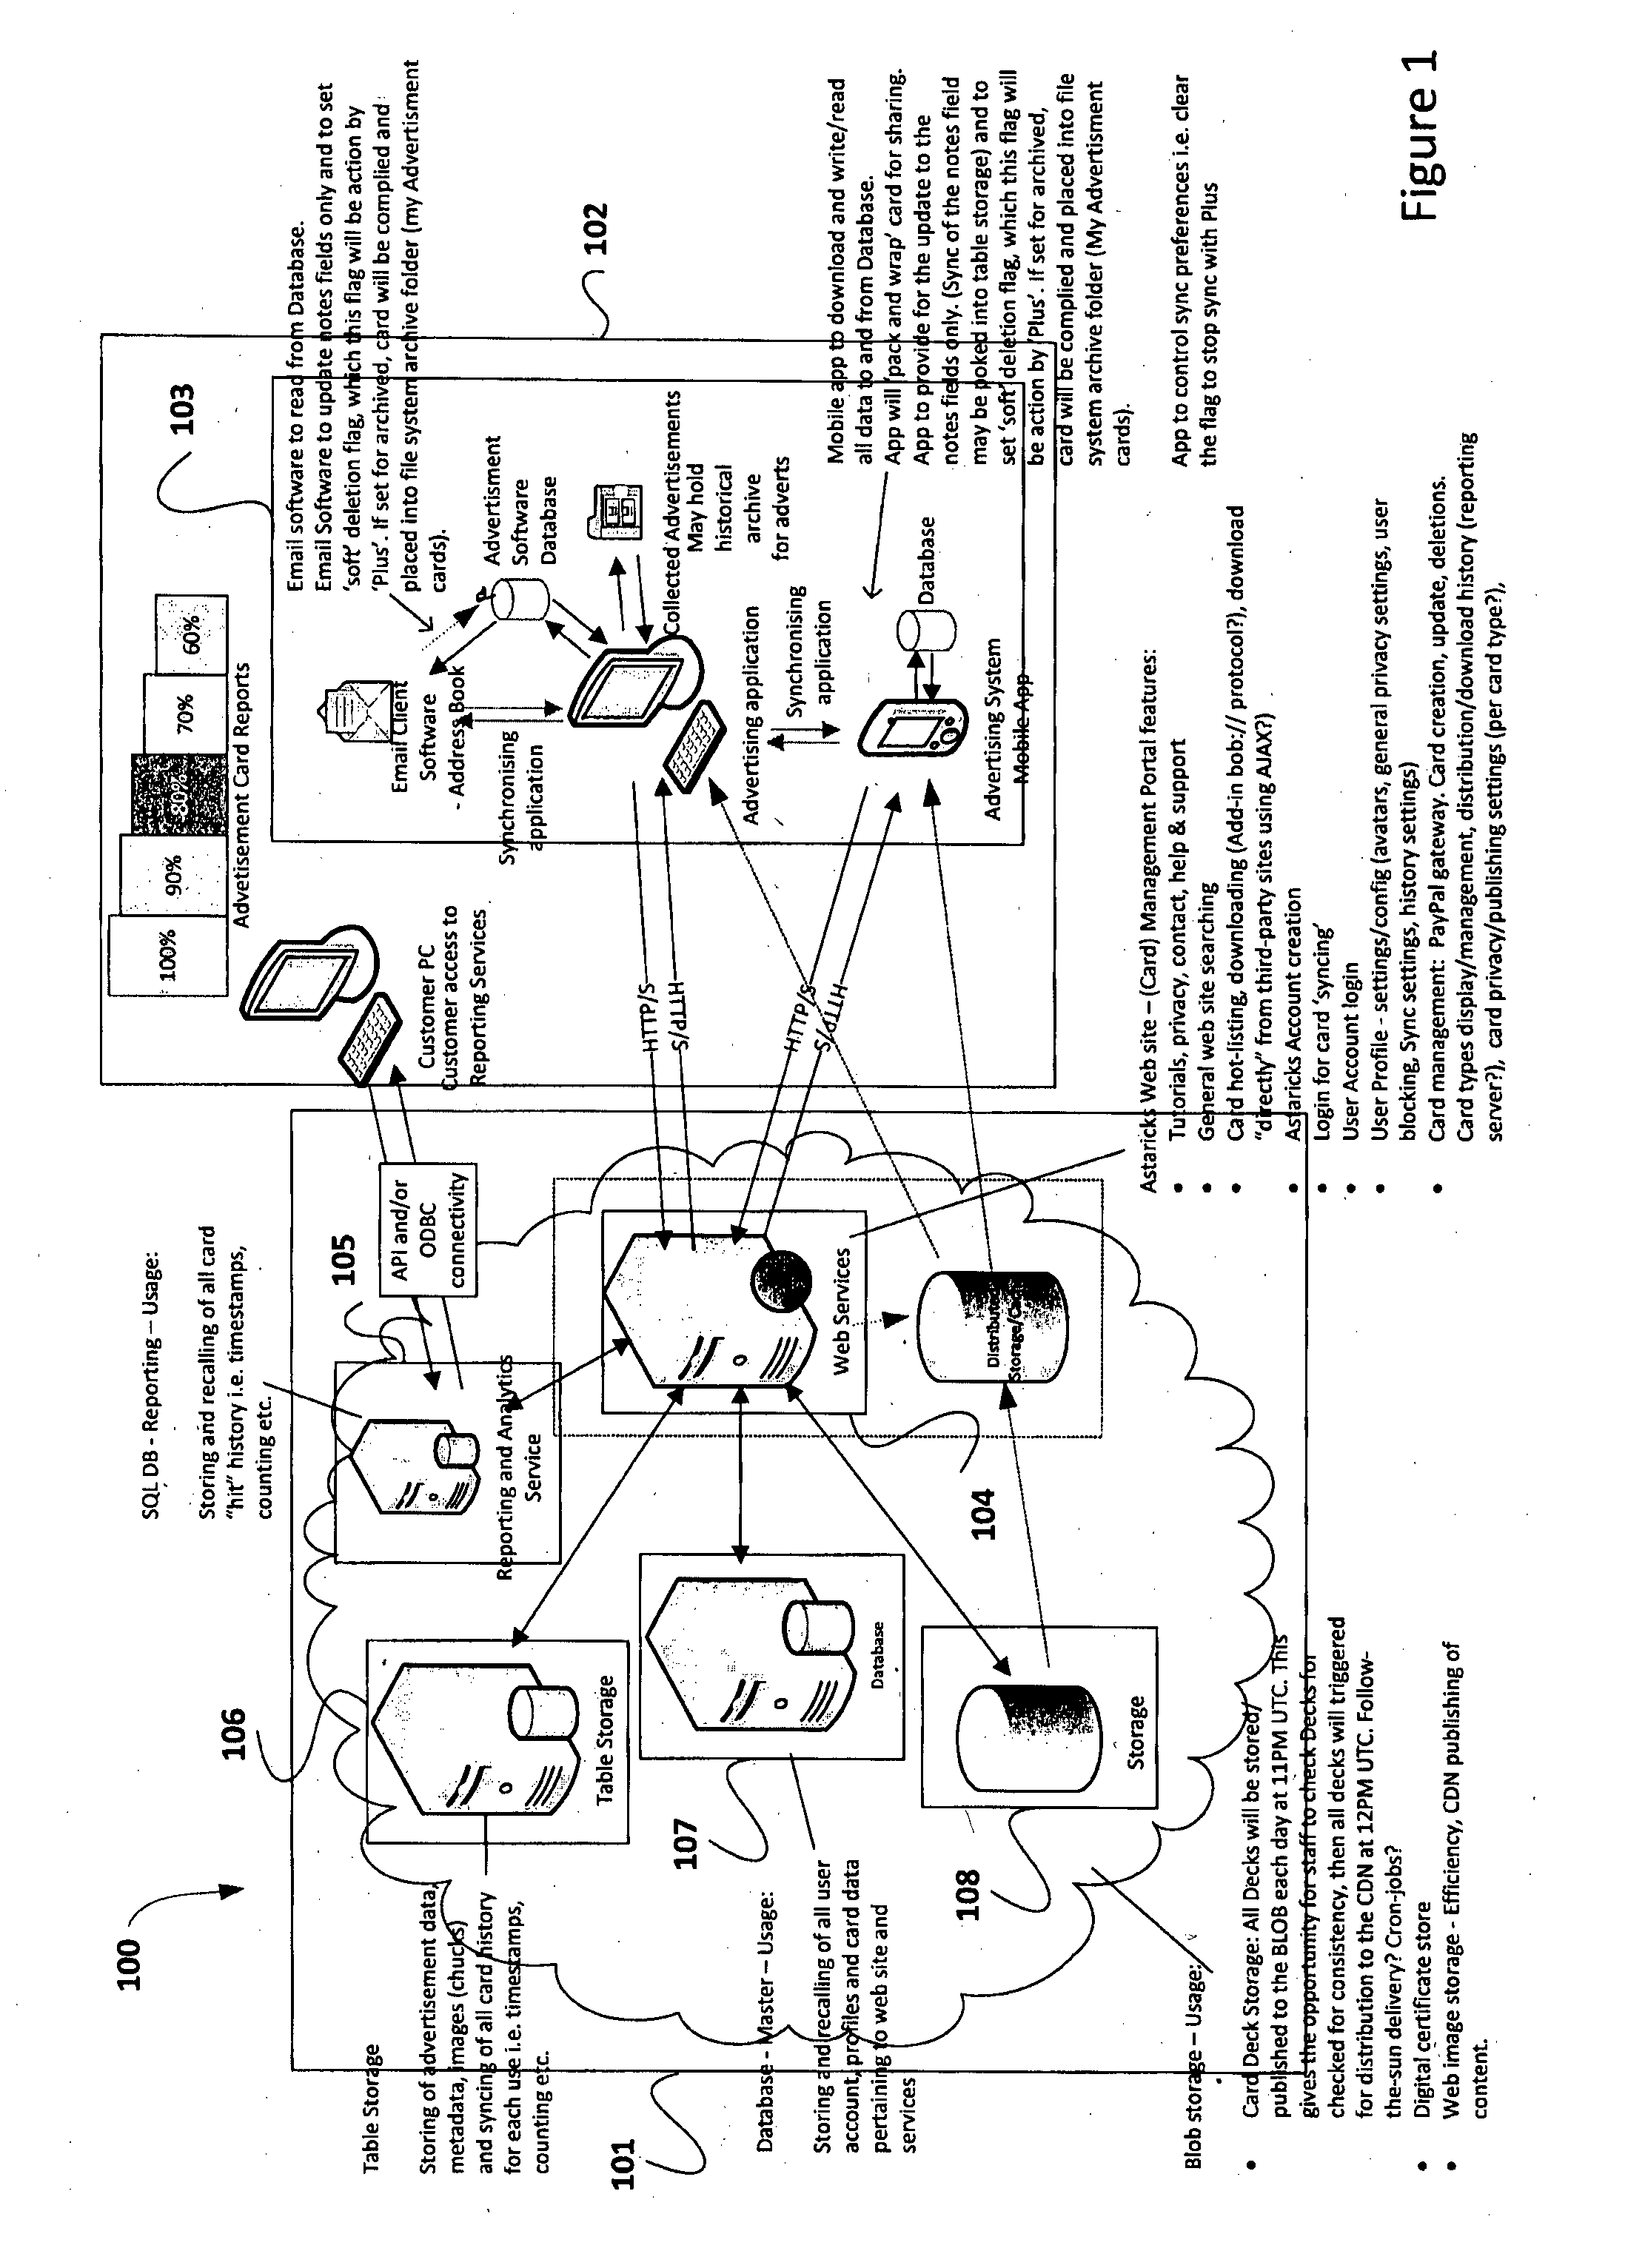 System and method for advertising